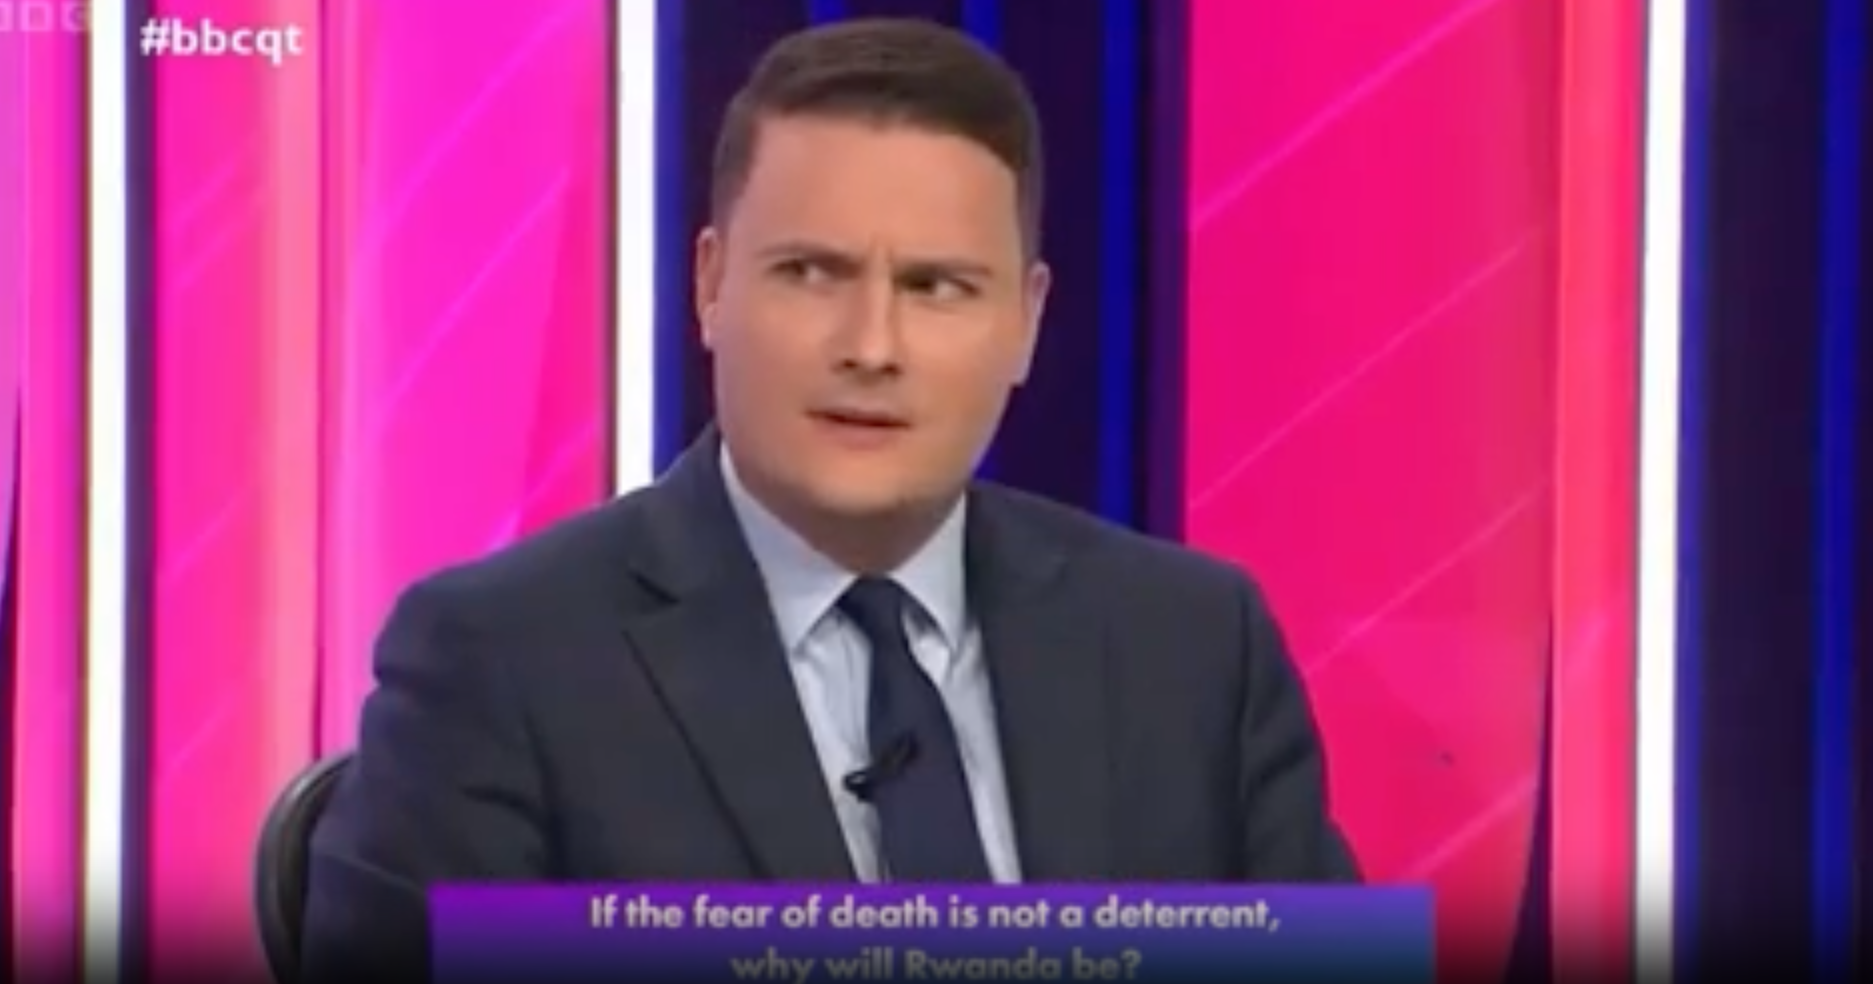 Labour’s Wes Streeting looked bewildered